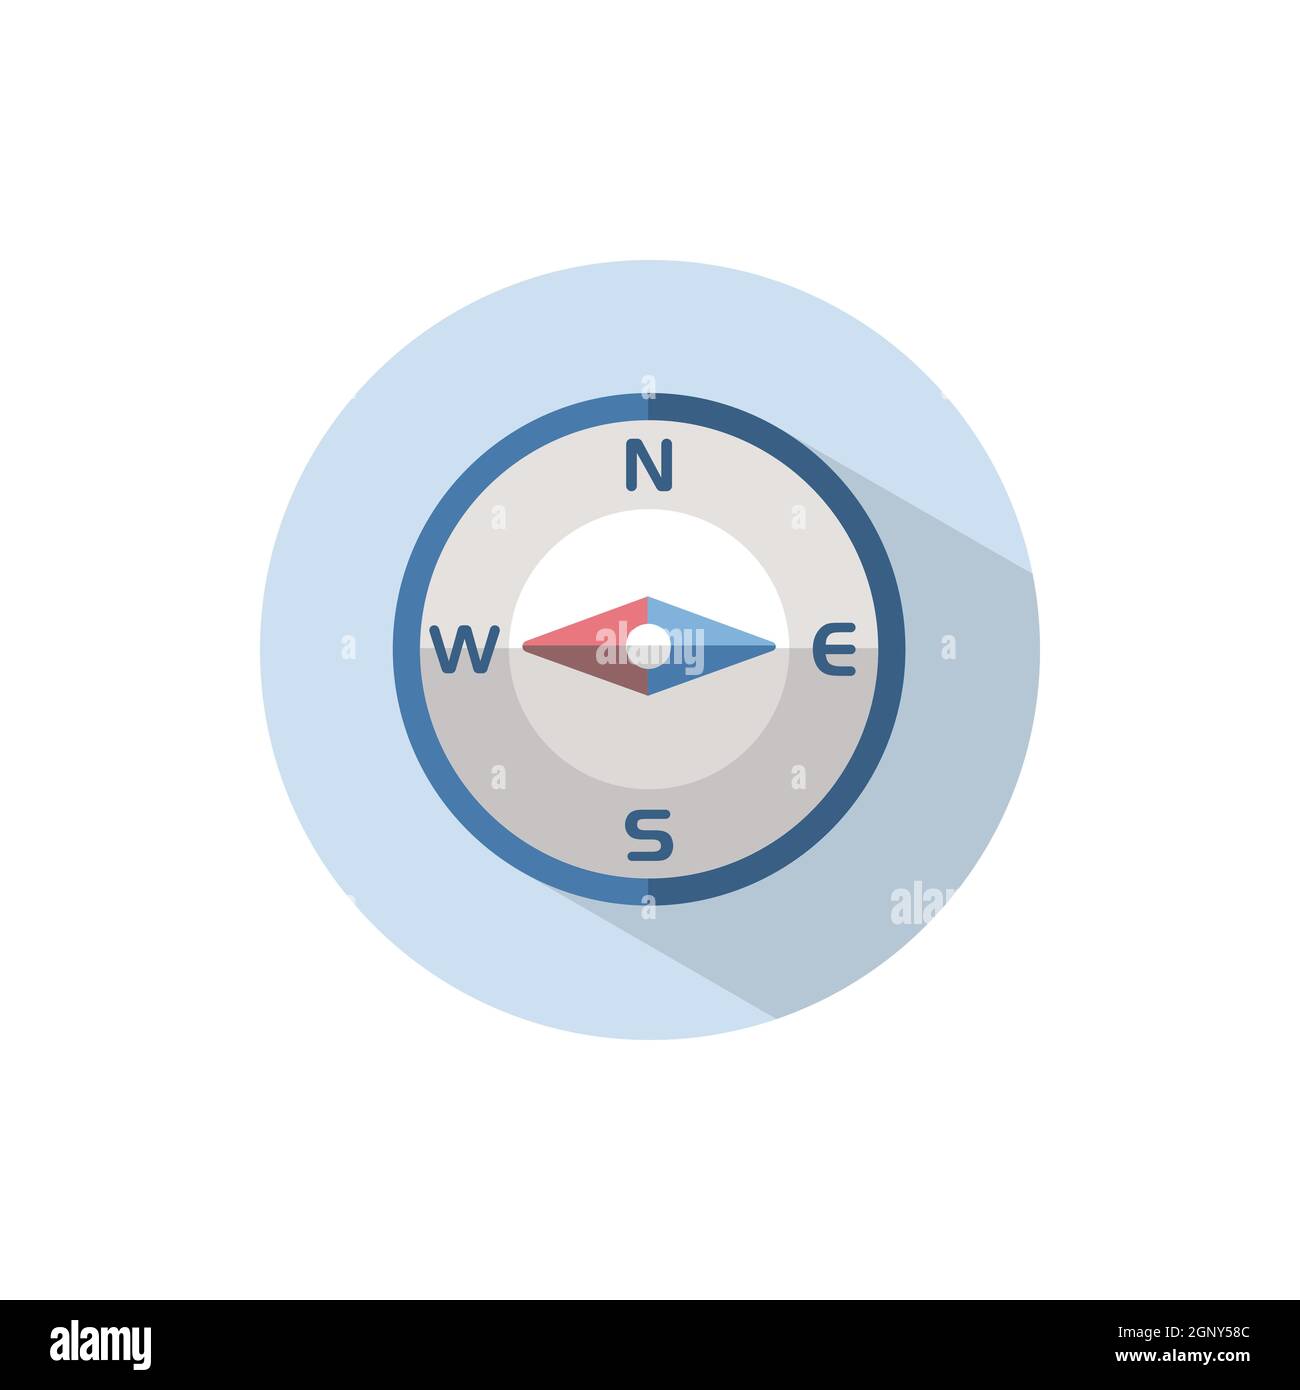 Compass west direction. Flat icon on a circle. Weather vector illustration Stock Vector